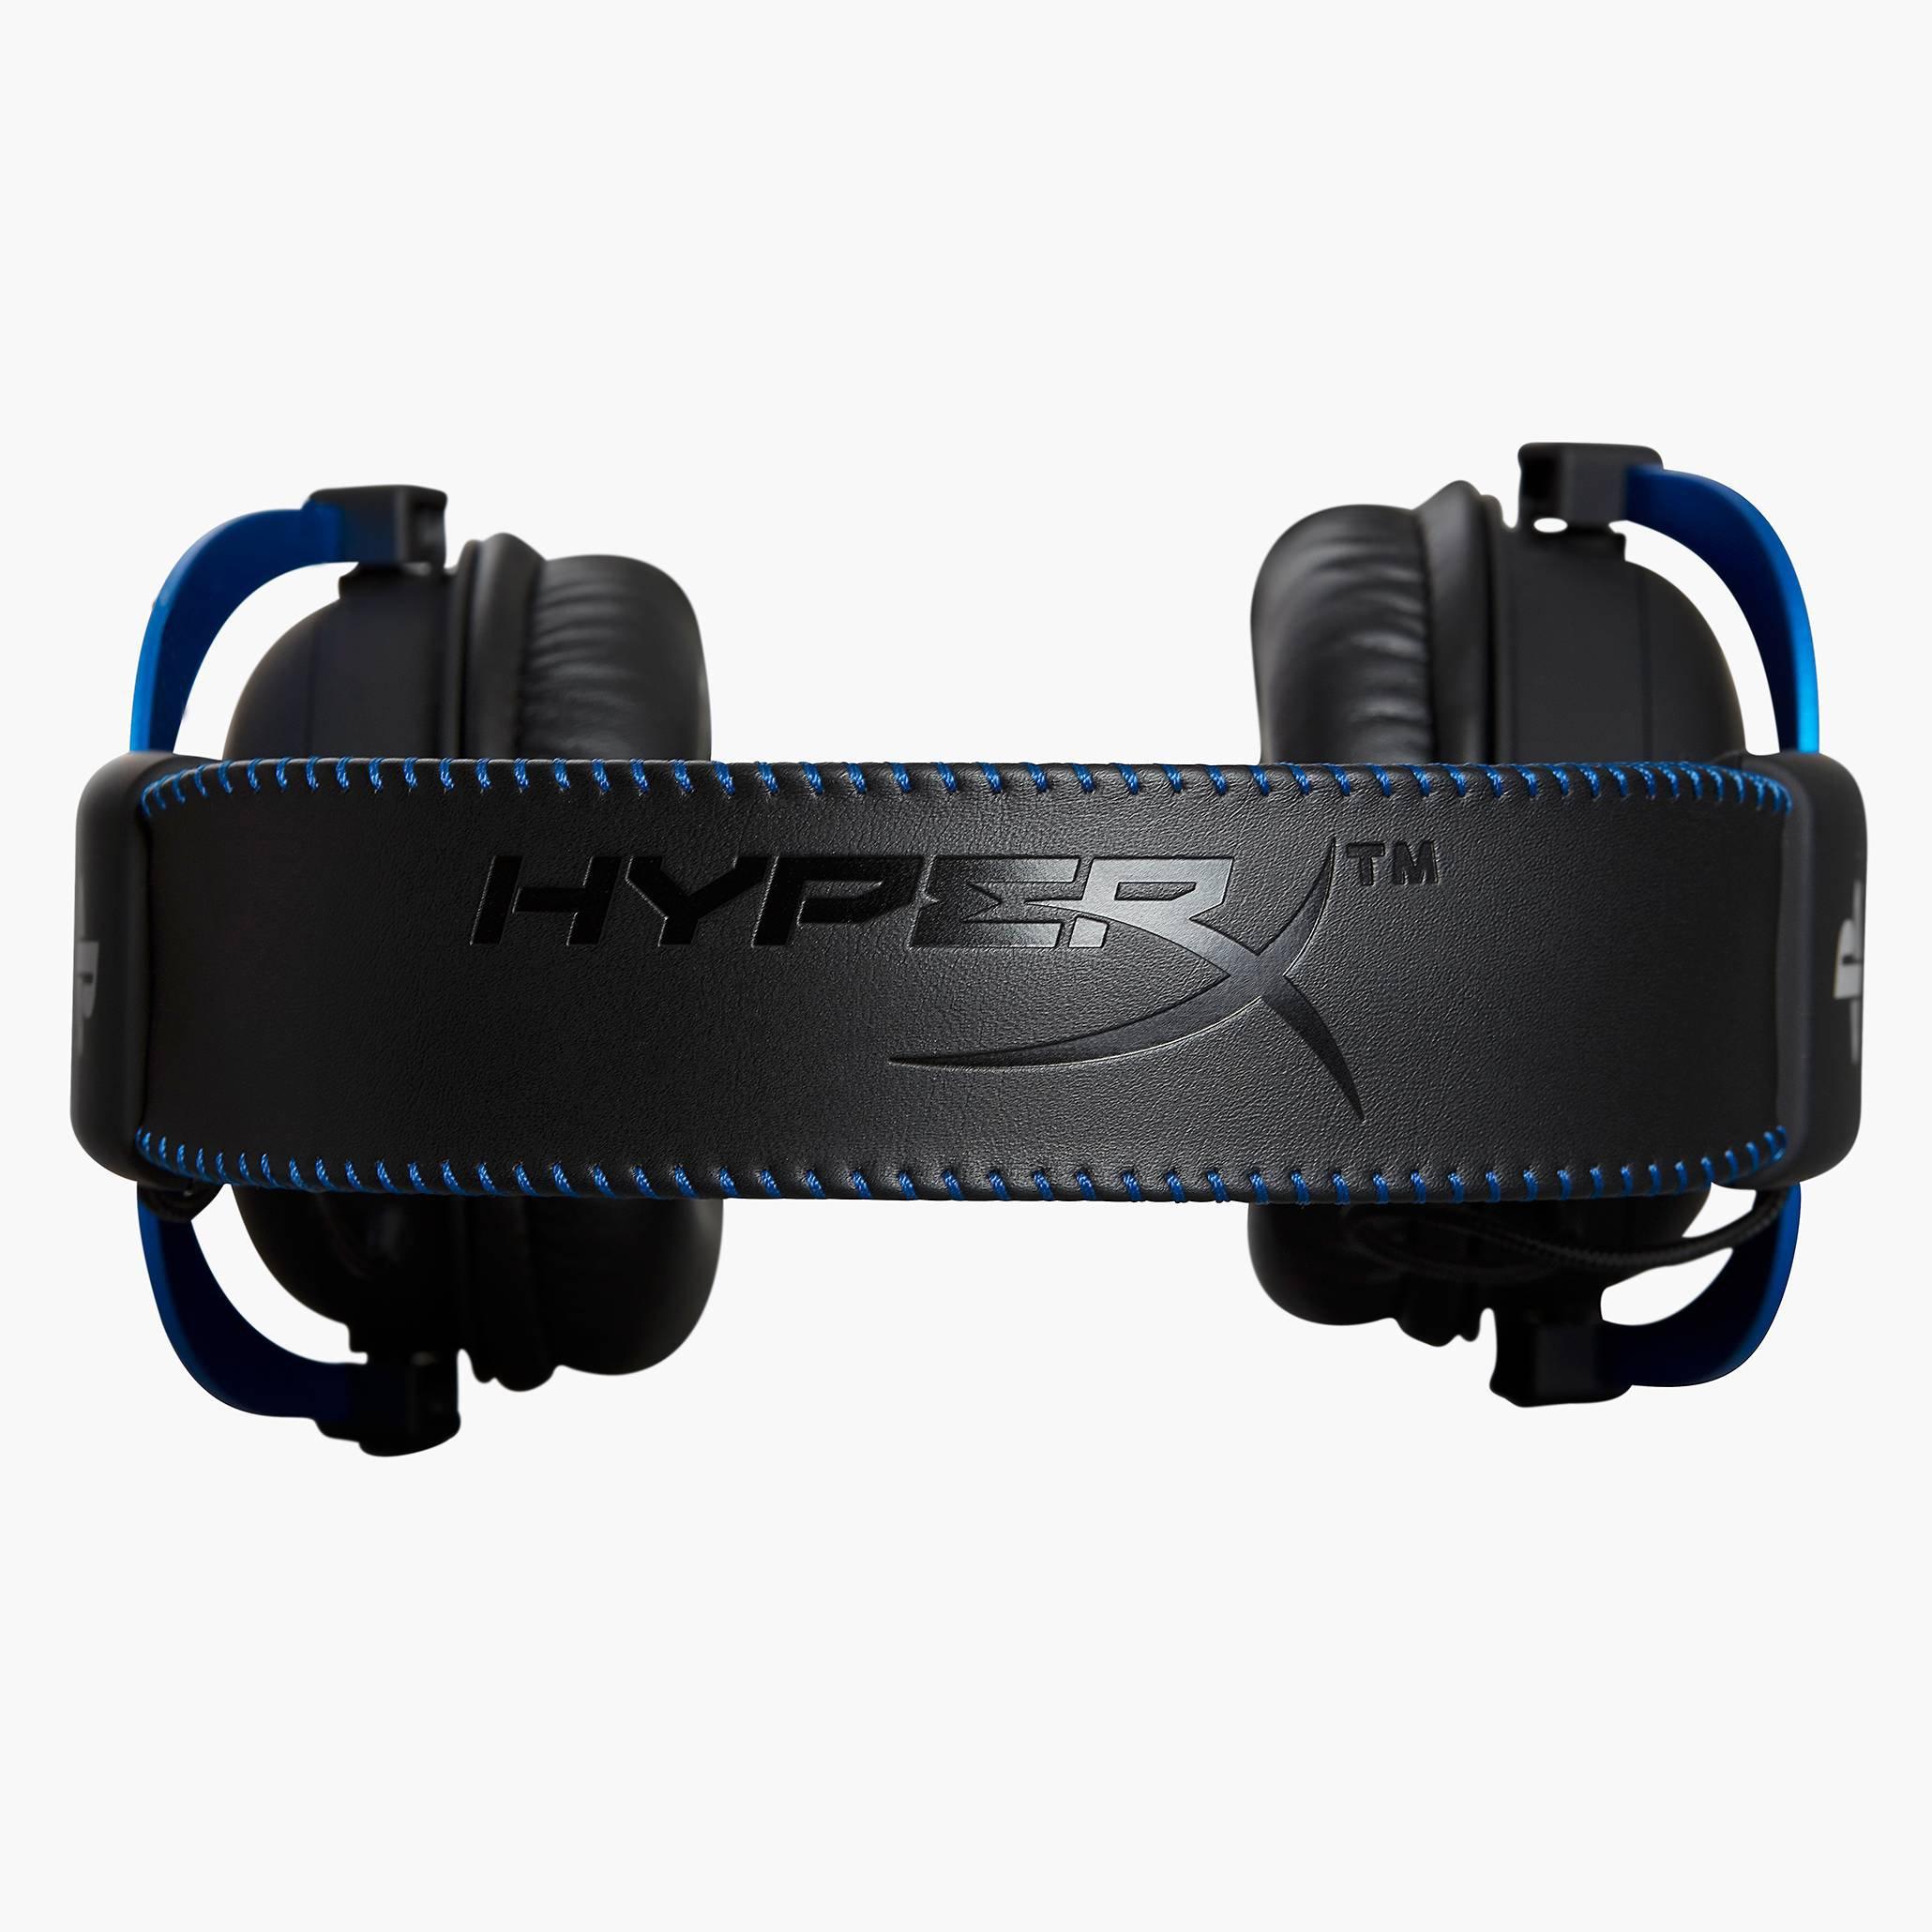  HyperX Cloud Chat Headset – Official PlayStation Licensed for  PS4, Clear Voice Chat, 40mm Driver, Noise-Cancellation Microphone, Pop  Filter, In-Line Audio CONTROLS, Lightweight, Reversible : Video Games